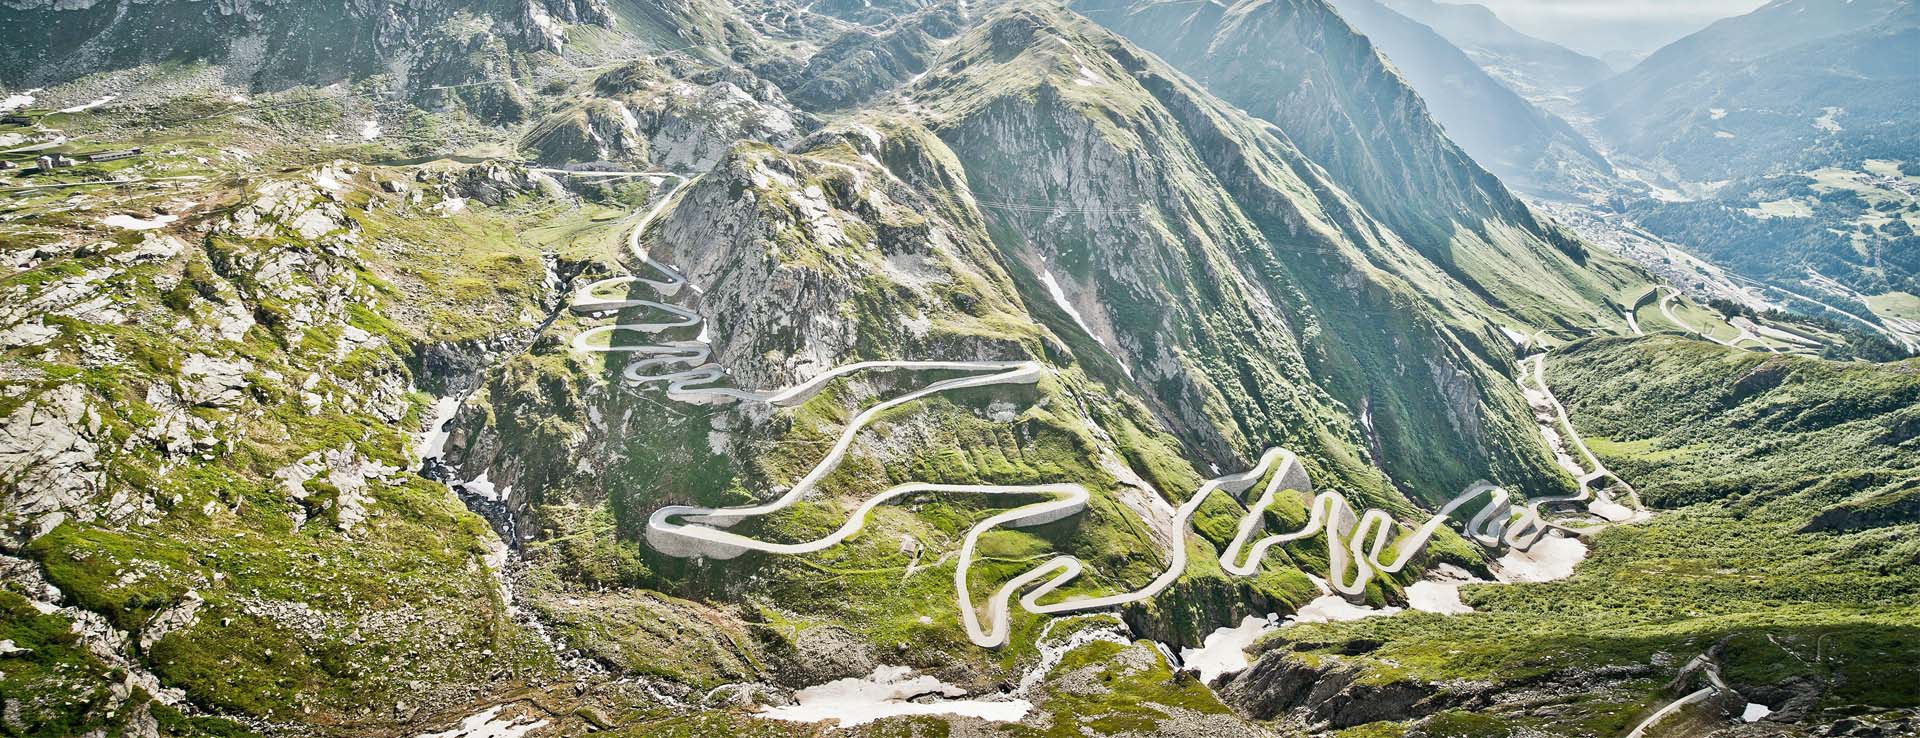 The switchback roads of the Swiss Alps